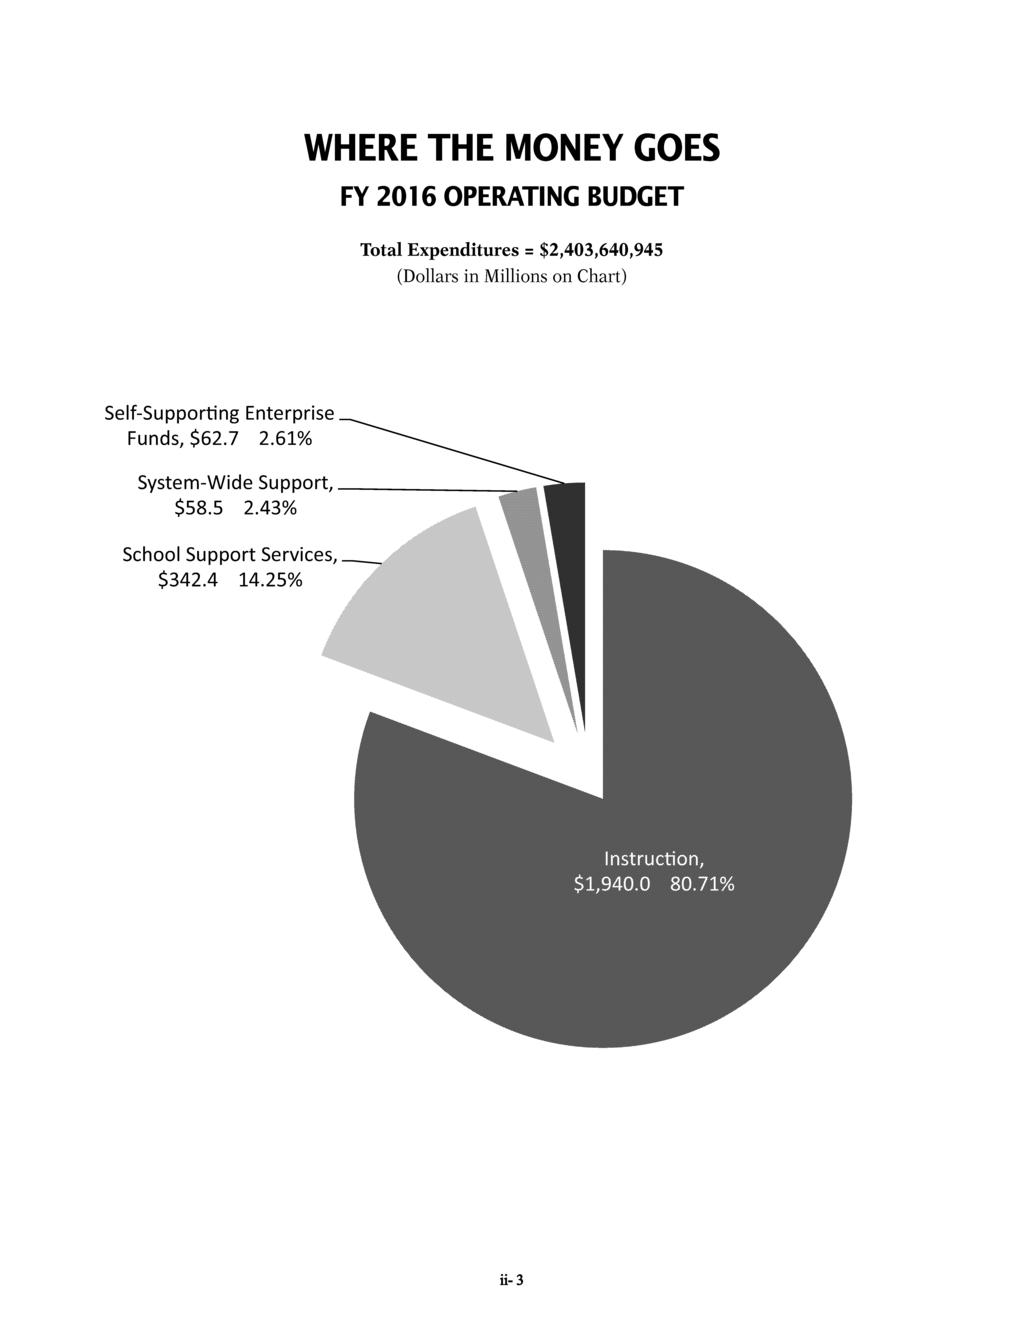 WHERE THE MONEY GOES FY 2016 OPERATNG BUDGET Total Expenditures= $2,403,640,945 (Dollars in Millions on Chart)